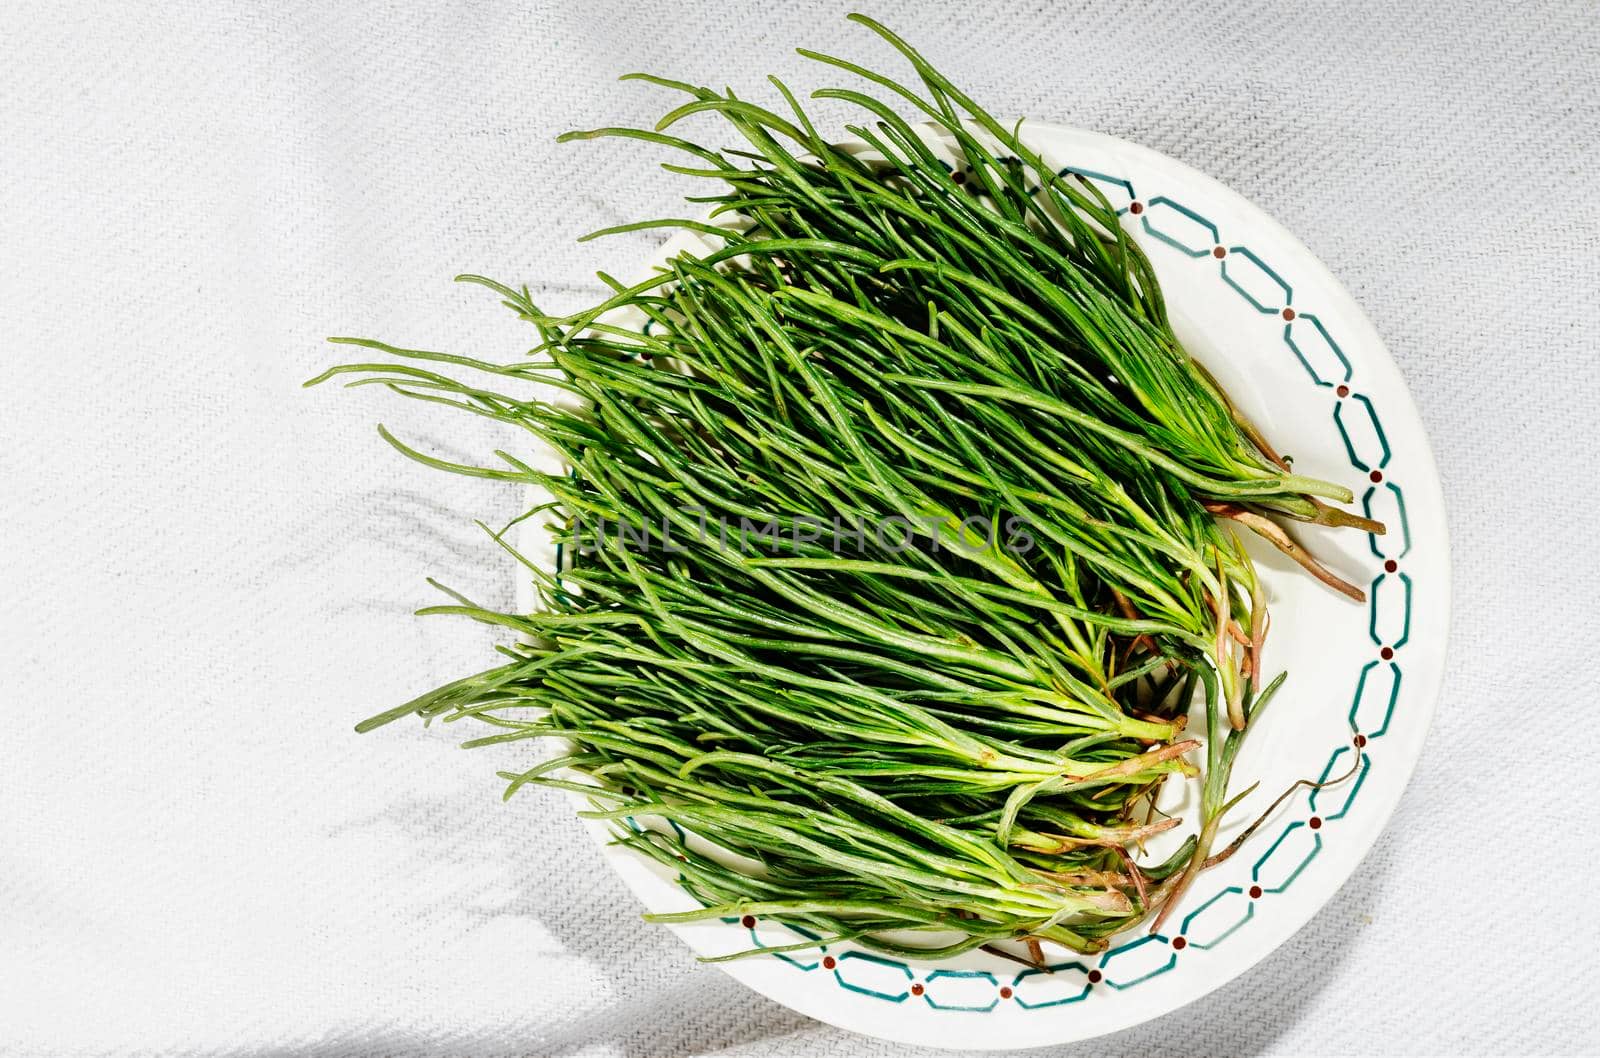 Bunch of agretti -salsola soda or opposite -leaved saltwort -on white plate ,fresh uncooked green leaves